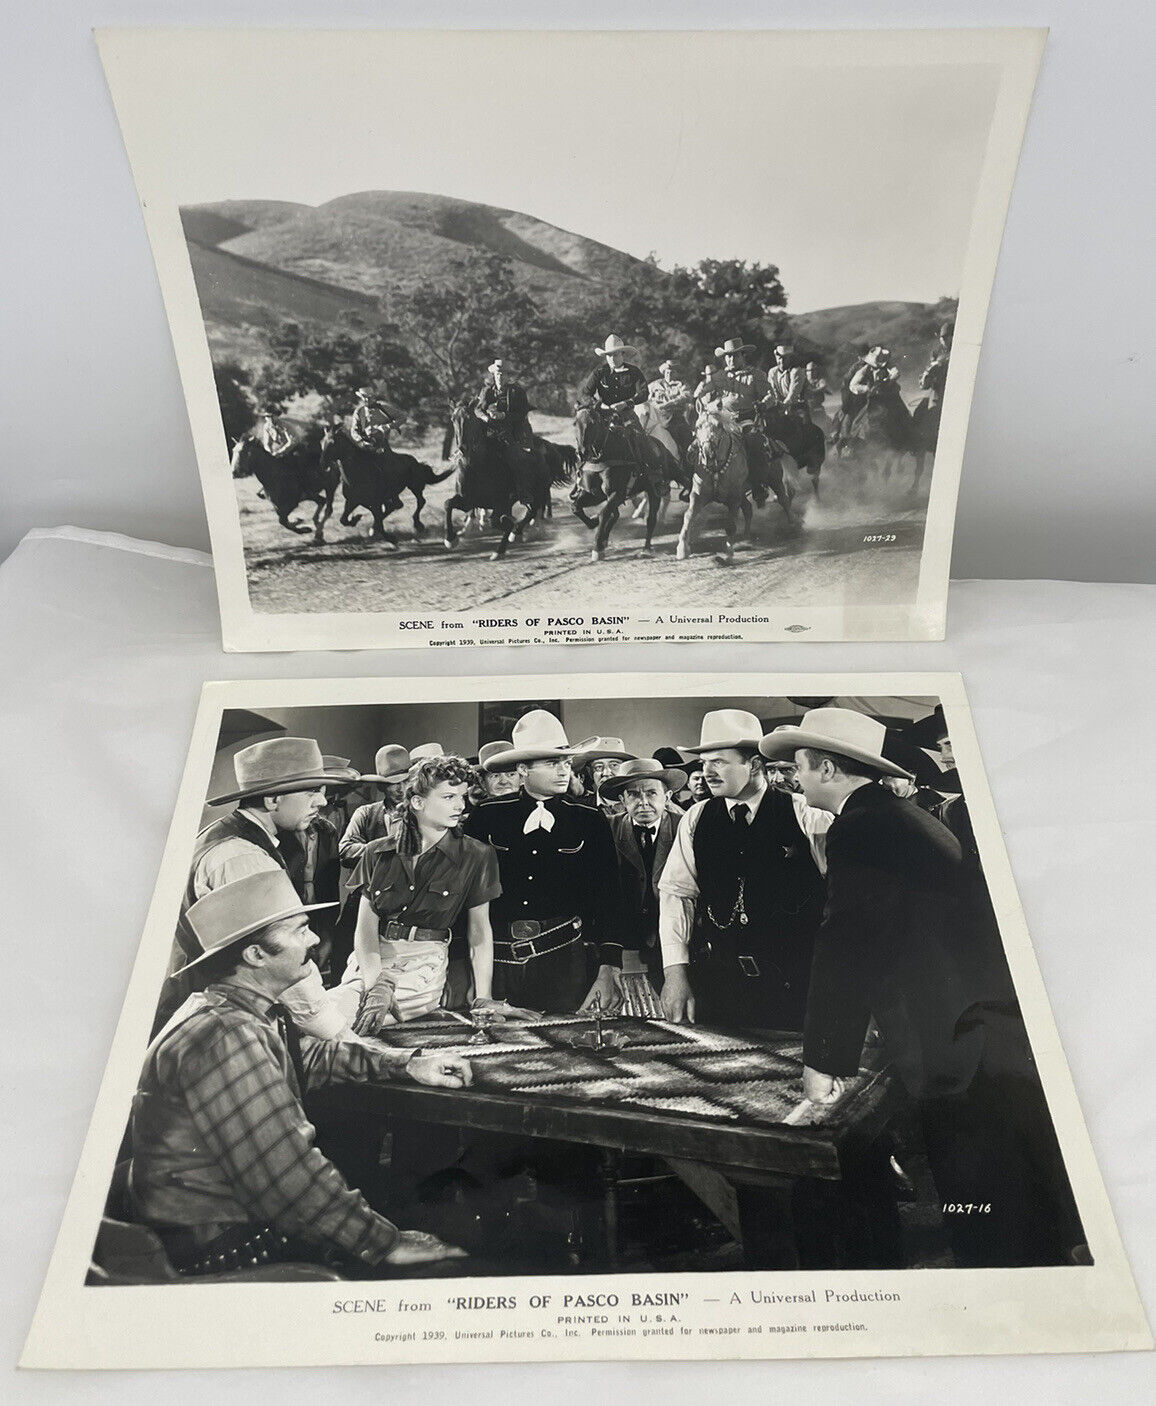 Two Original Photos Of “Riders of Pasco Basin” (1939) . Numbers 1027-29, 1027-16